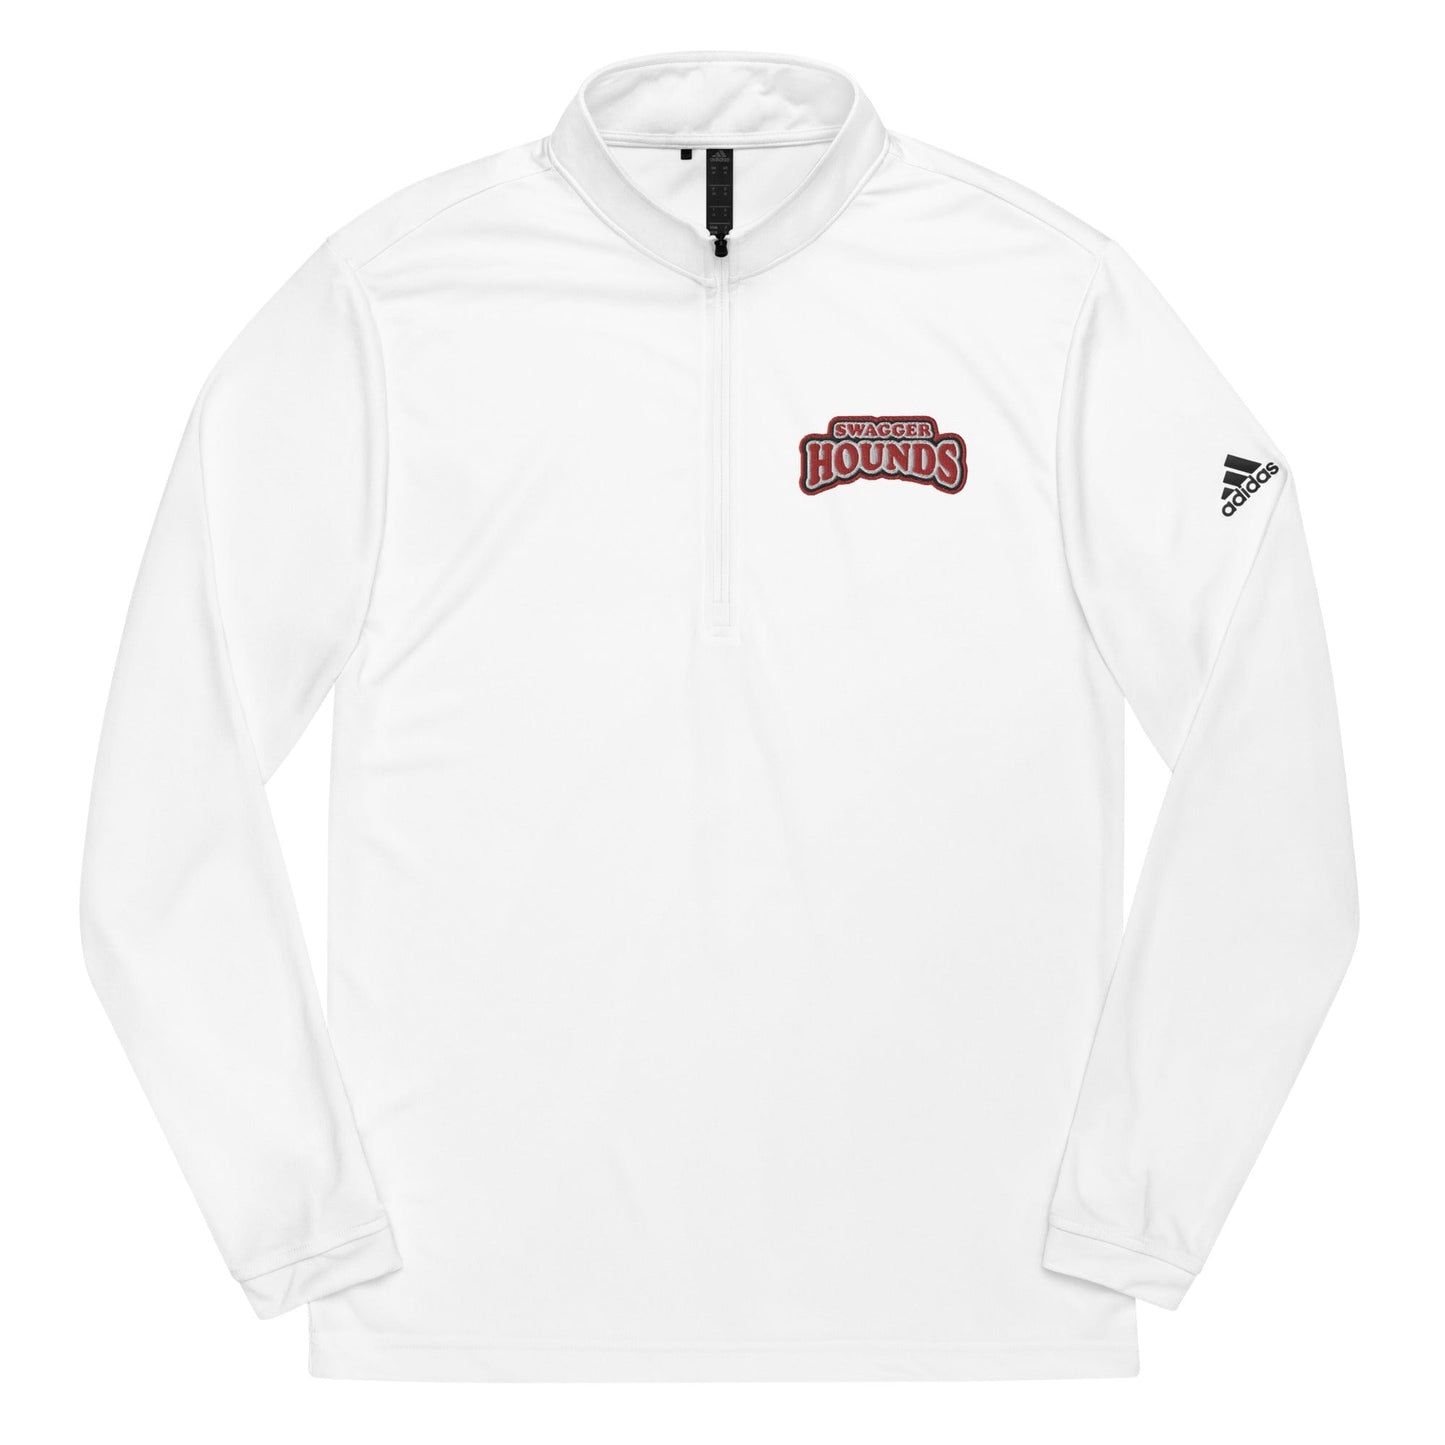 Swagger Hounds Adult Men's 1/4 Adidas Performance Pullover Signature Lacrosse